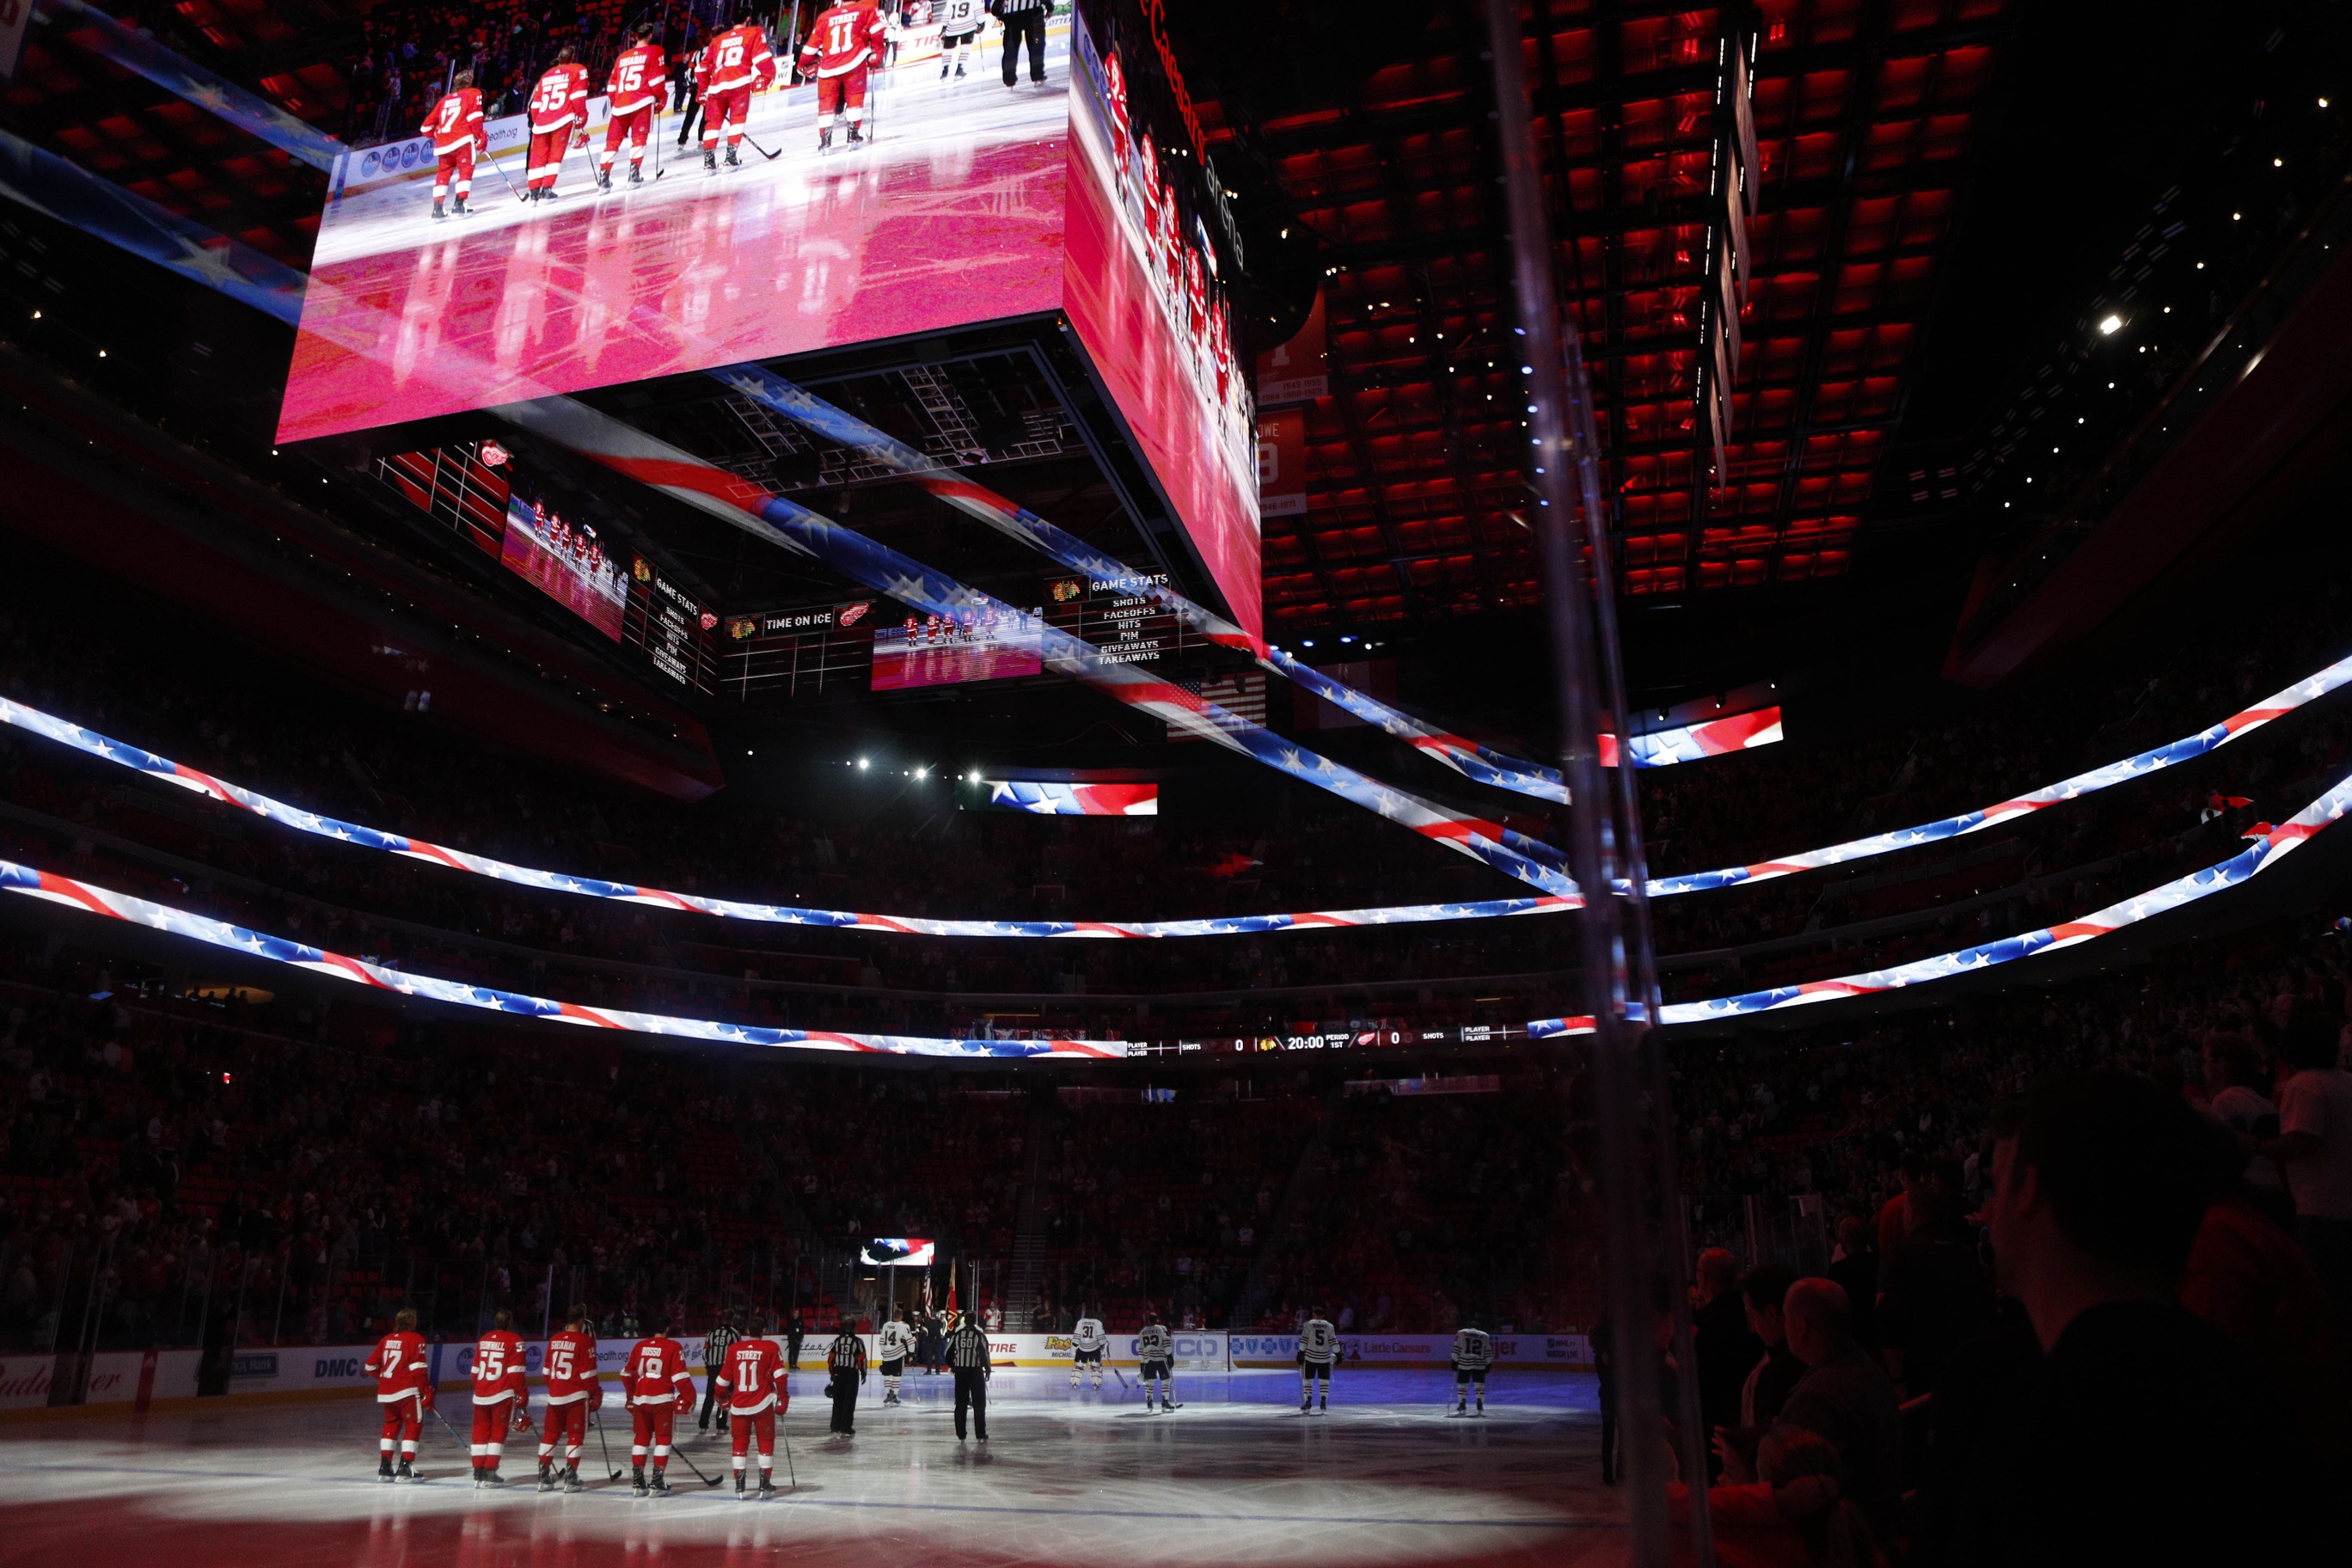 NHL teams aim to fill arenas, drawing fans away from screens – The